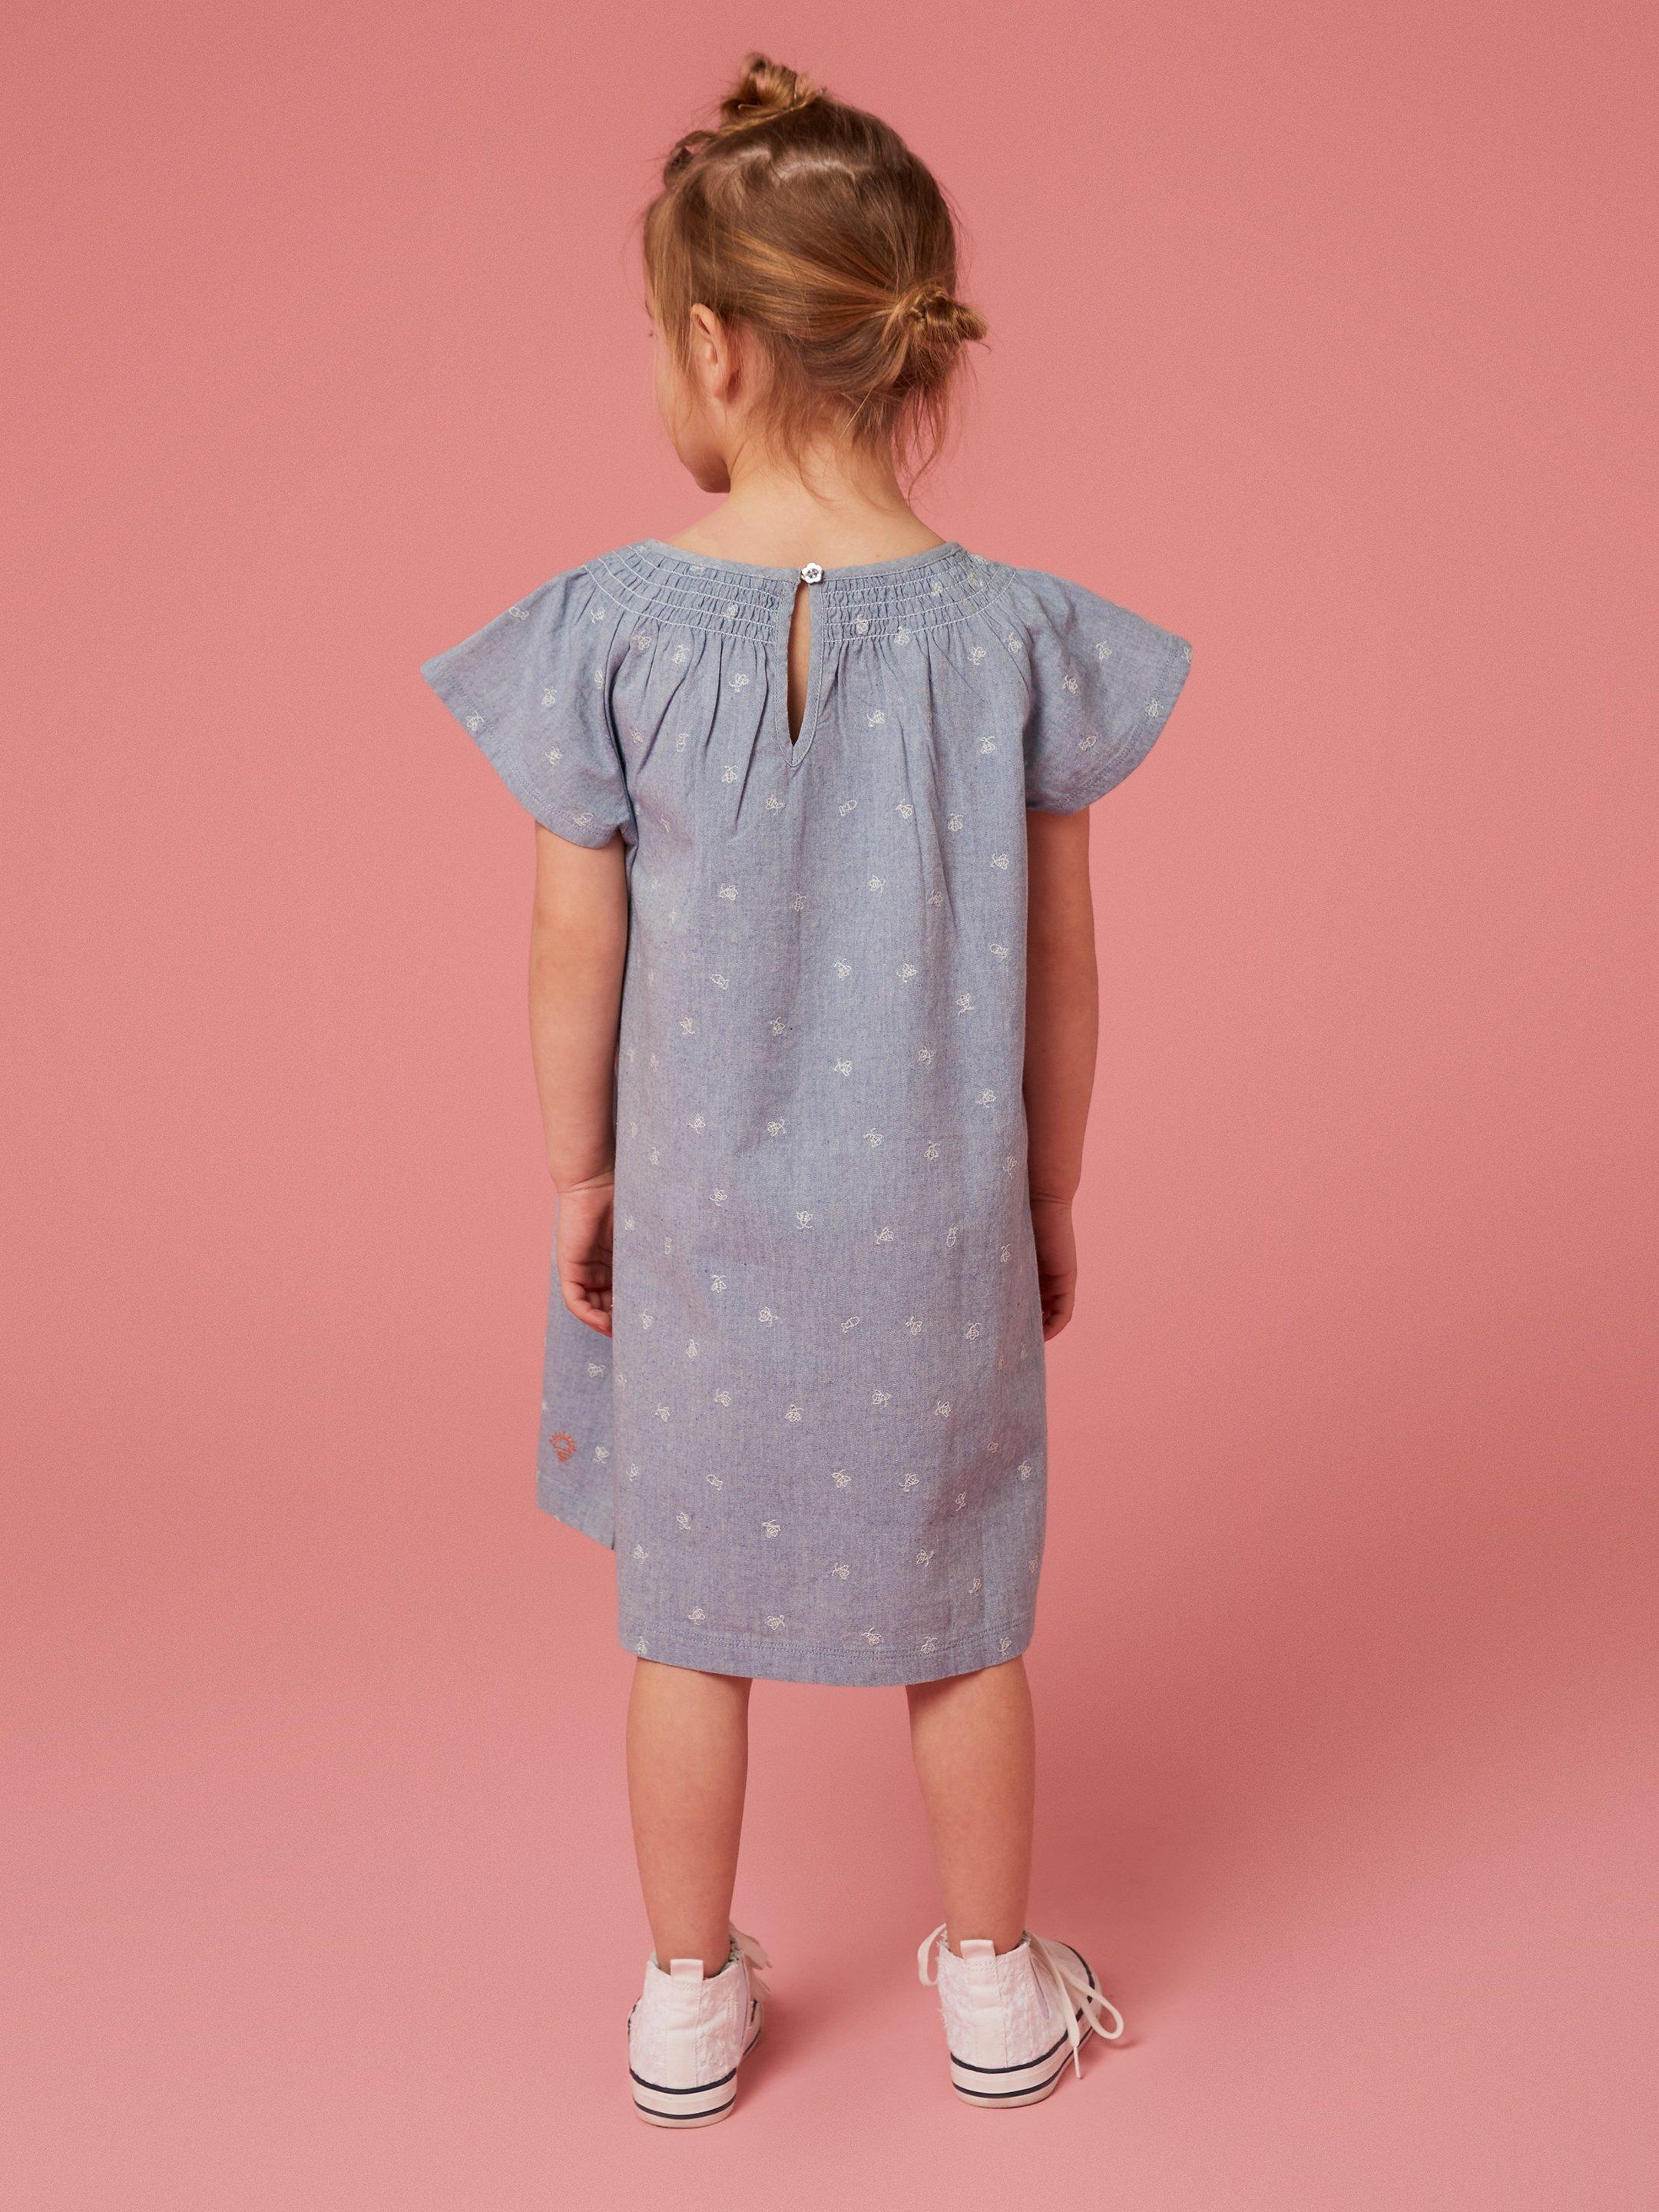 Chambray Frill Dress in CHAMB BLUE - MODEL BACK